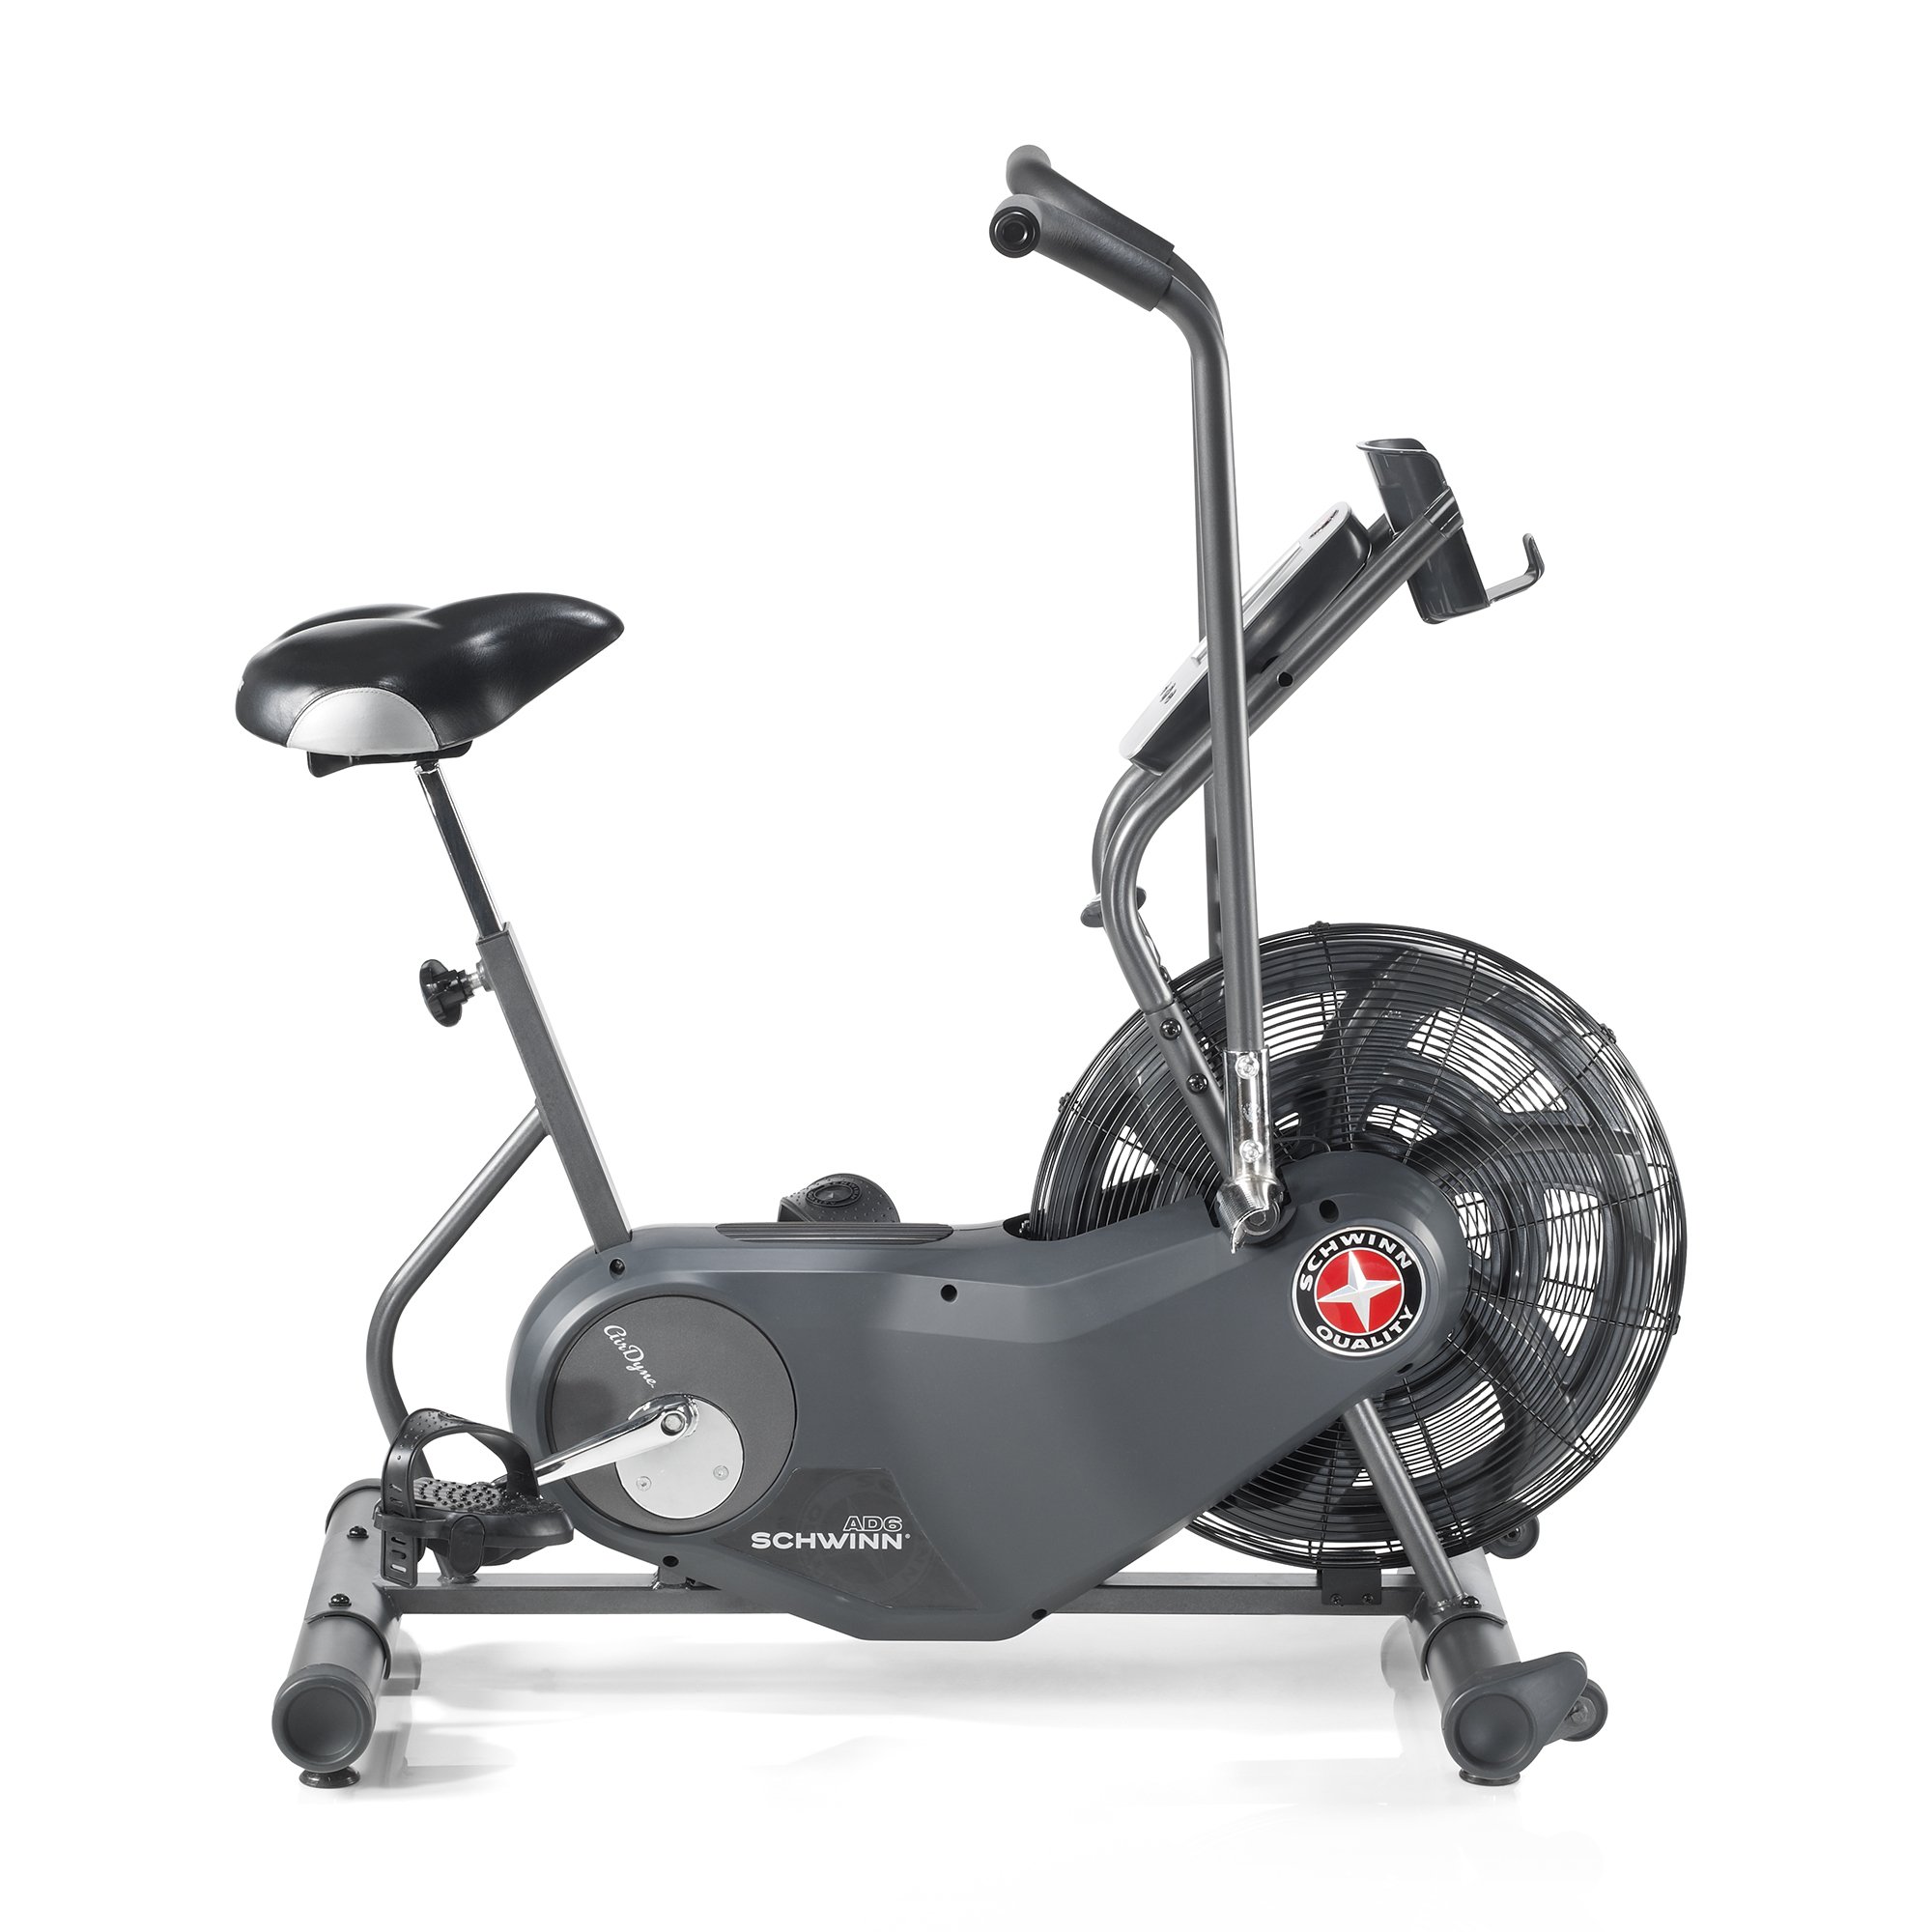 Airdyne Ad6 Bike Indoor Exercise